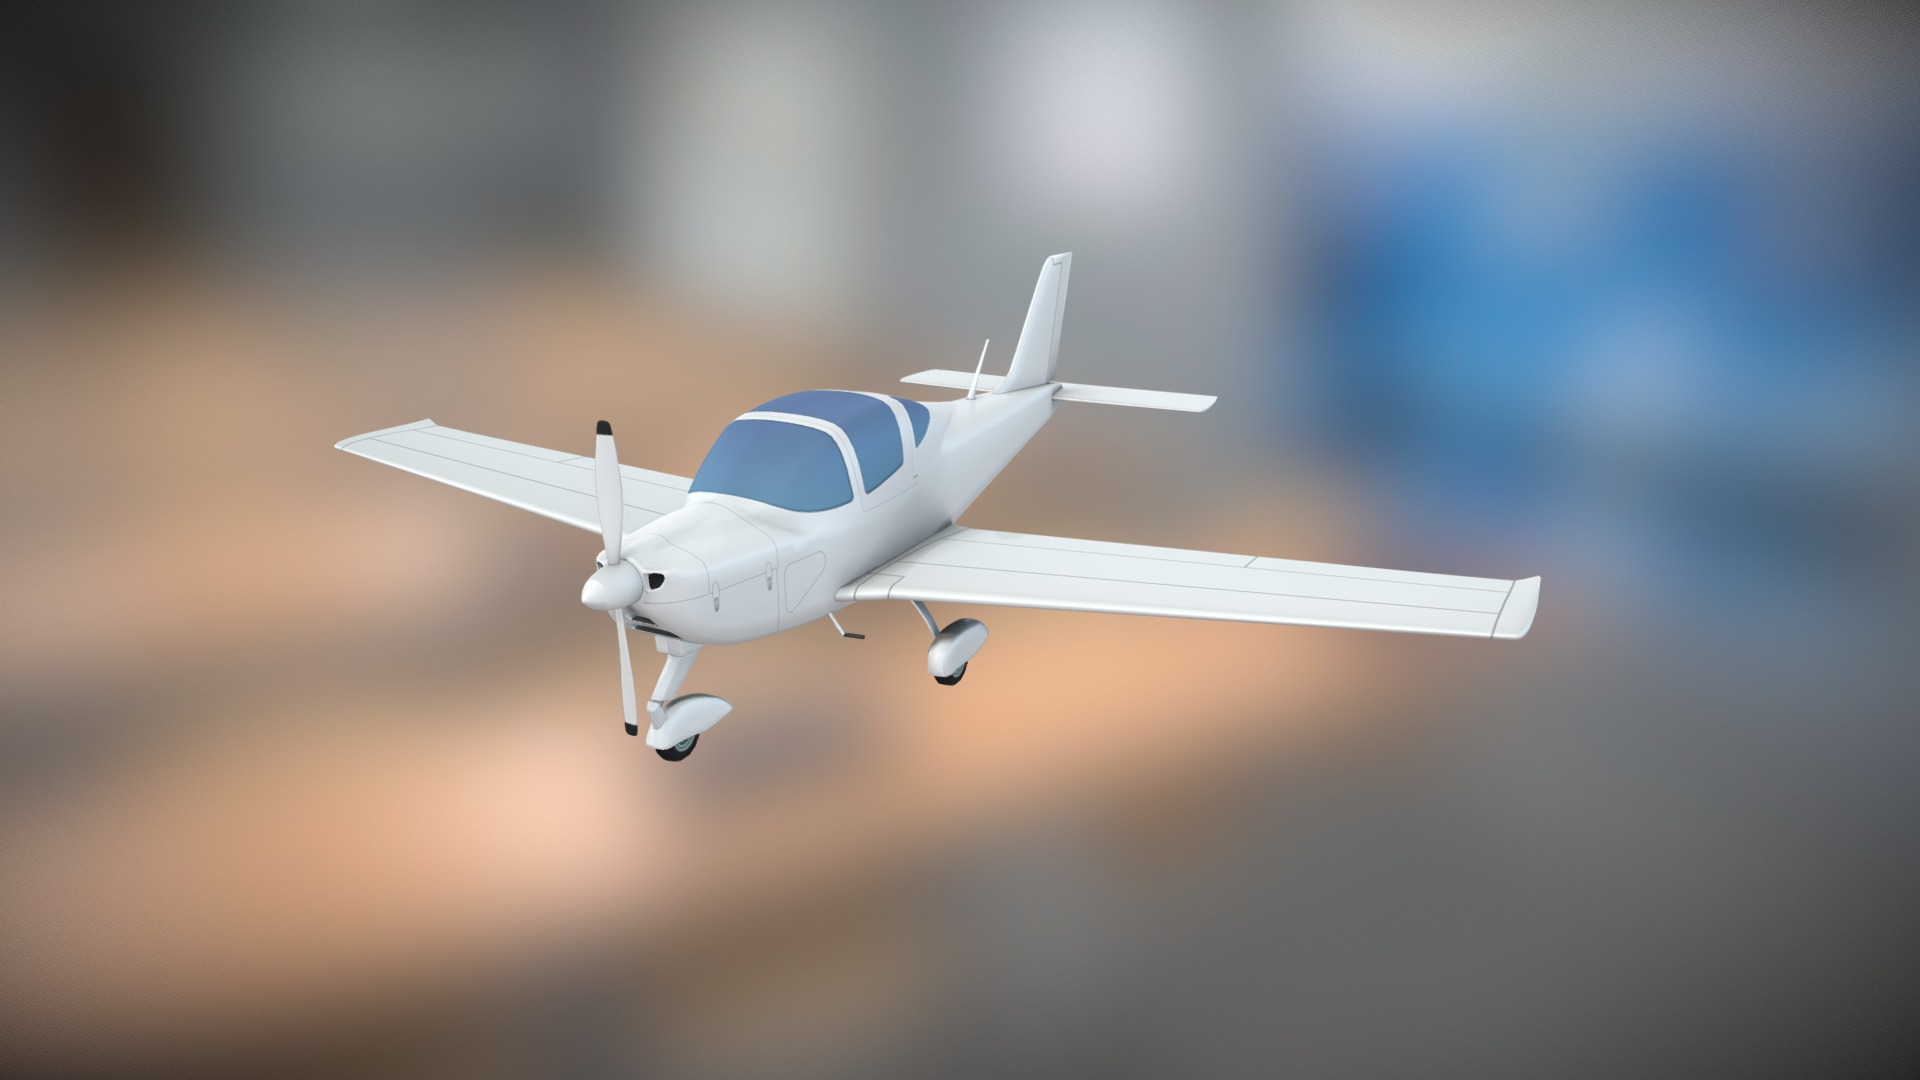 3D model Tecnam P2002 Sierra airplane - This is a 3D model of the Tecnam P2002 Sierra airplane. The 3D model is about a small white airplane flying in the sky.